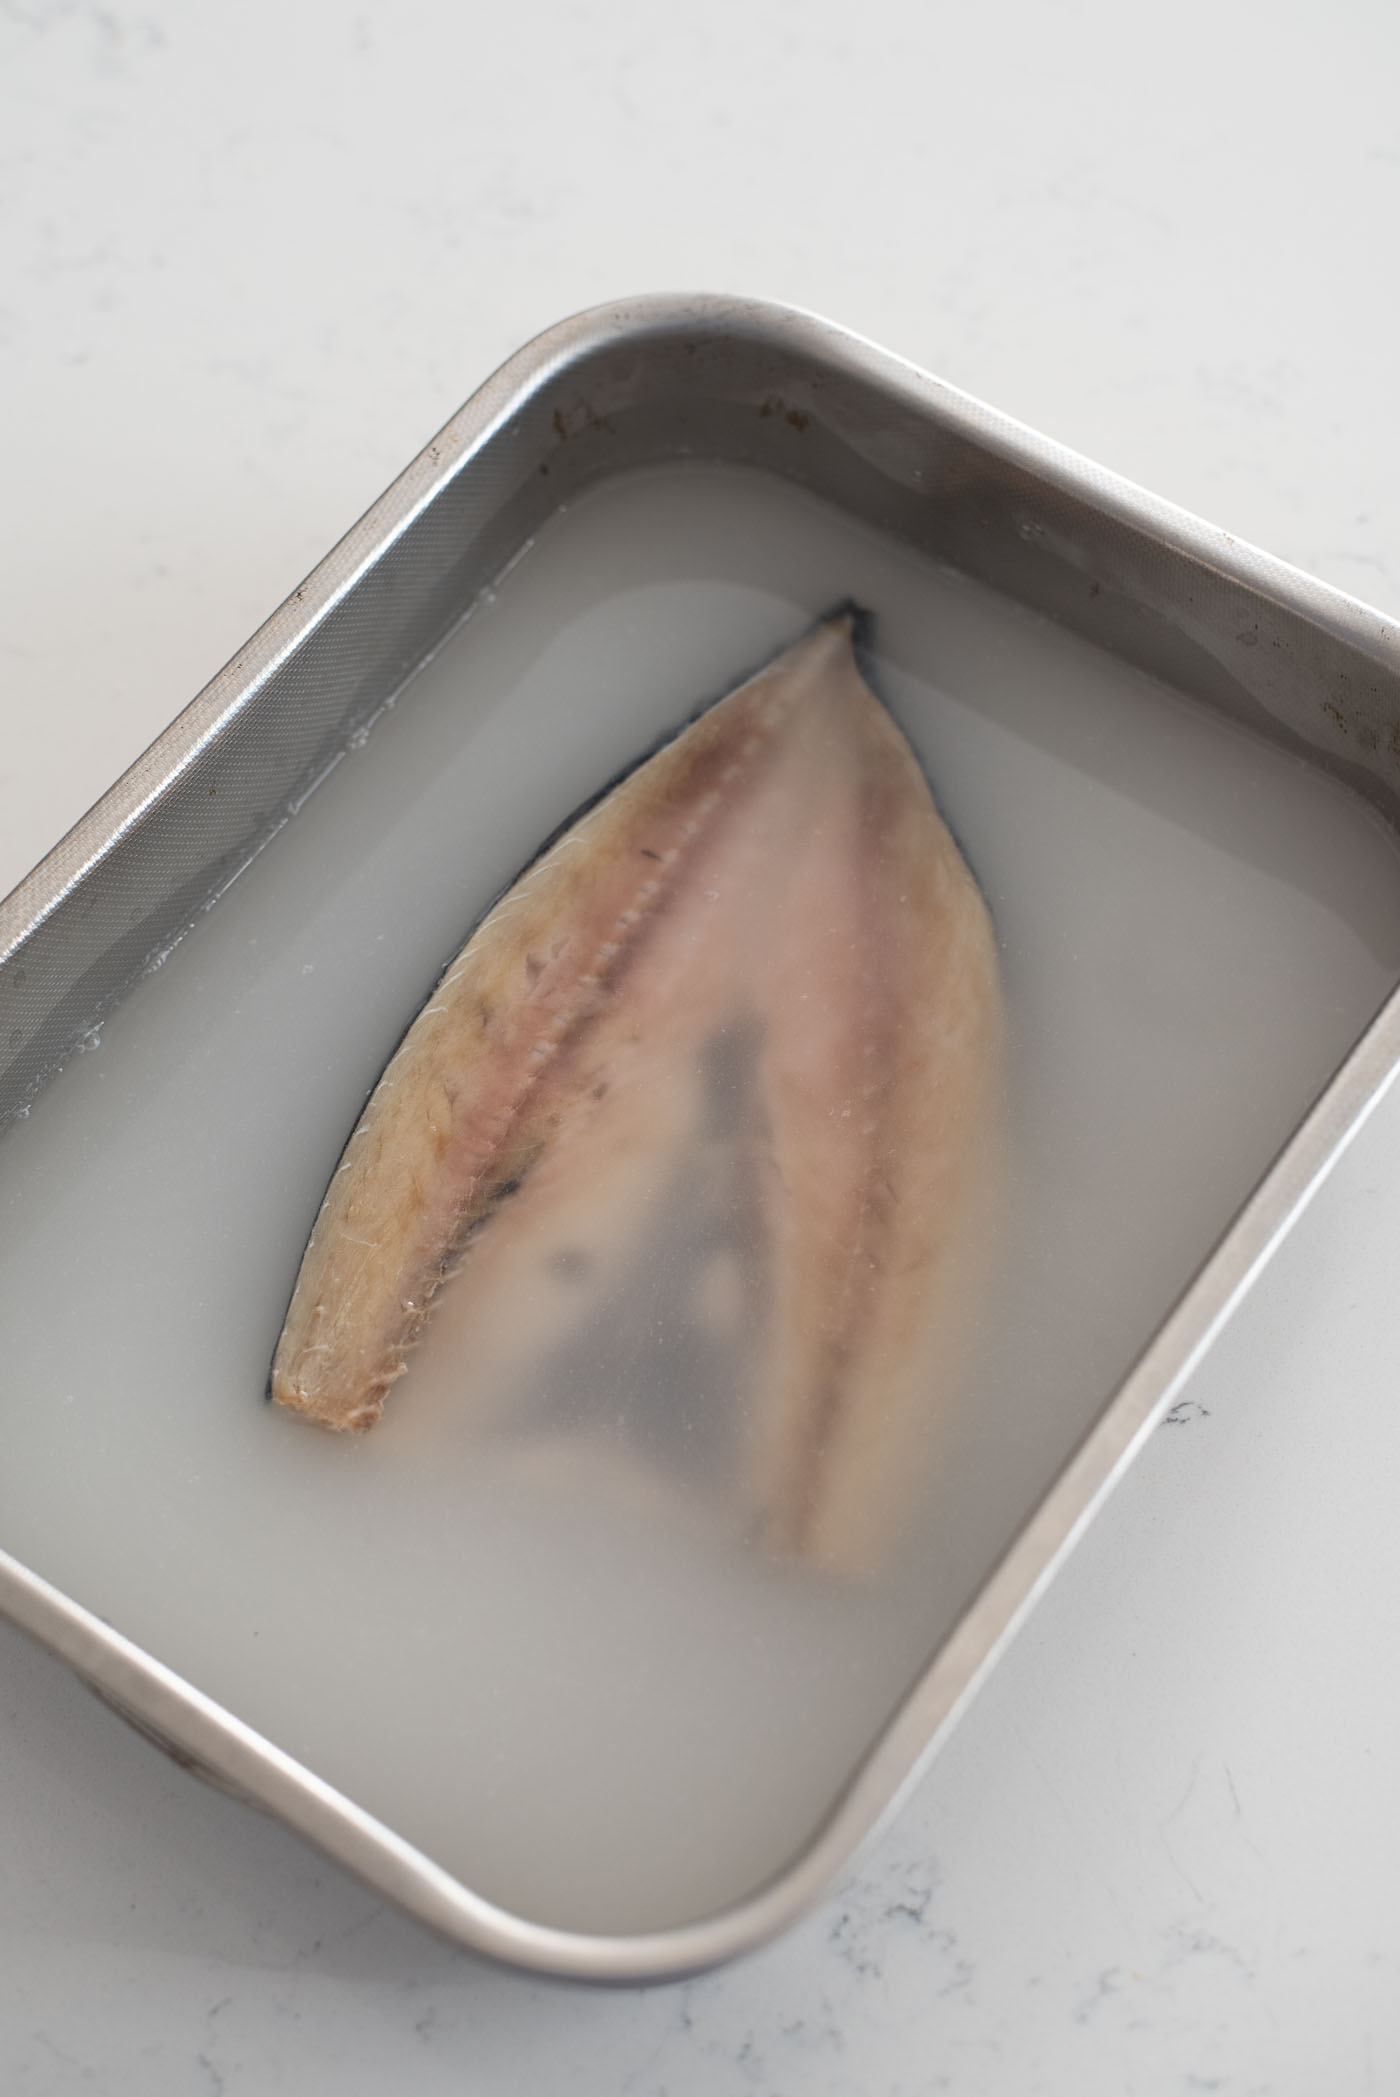 Salted mackerel is soaking in a rice water